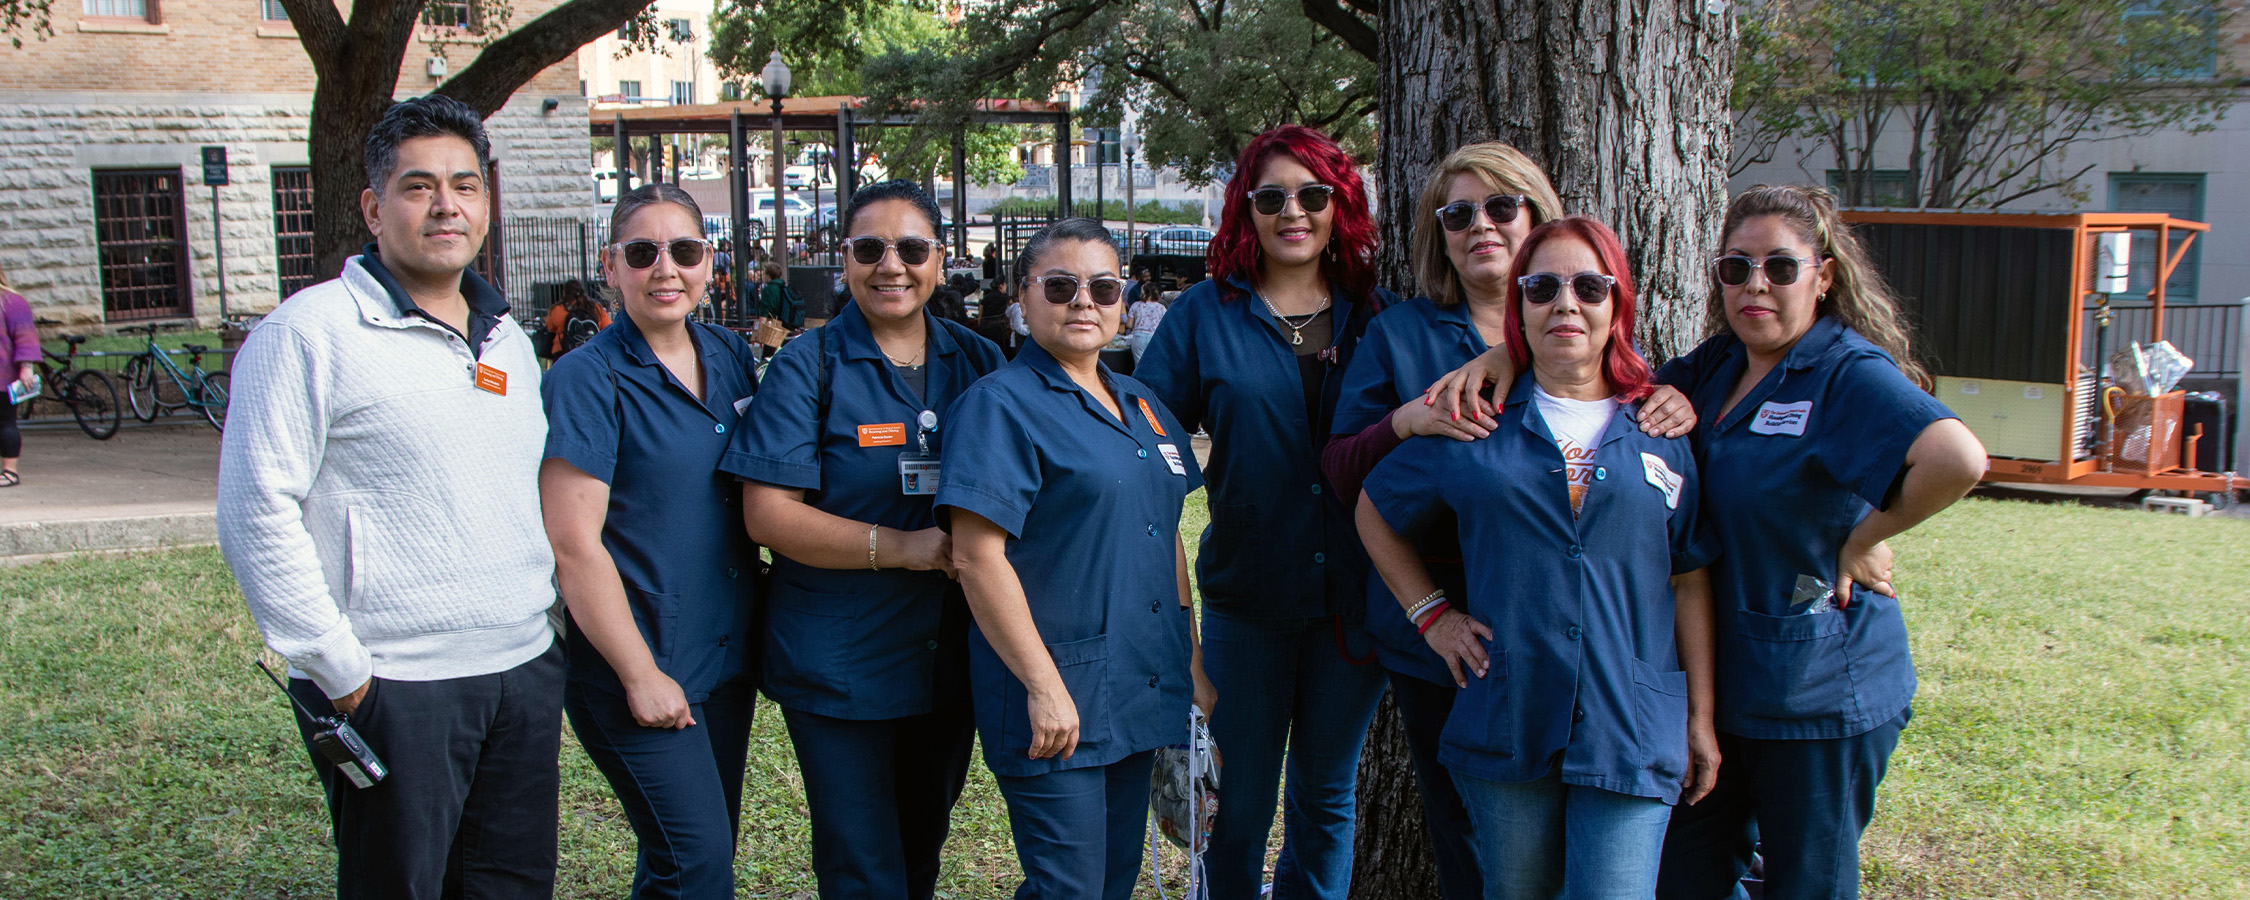 Eight UHD staff members in work uniforms at an employee event in the Honors Quad courtyard.